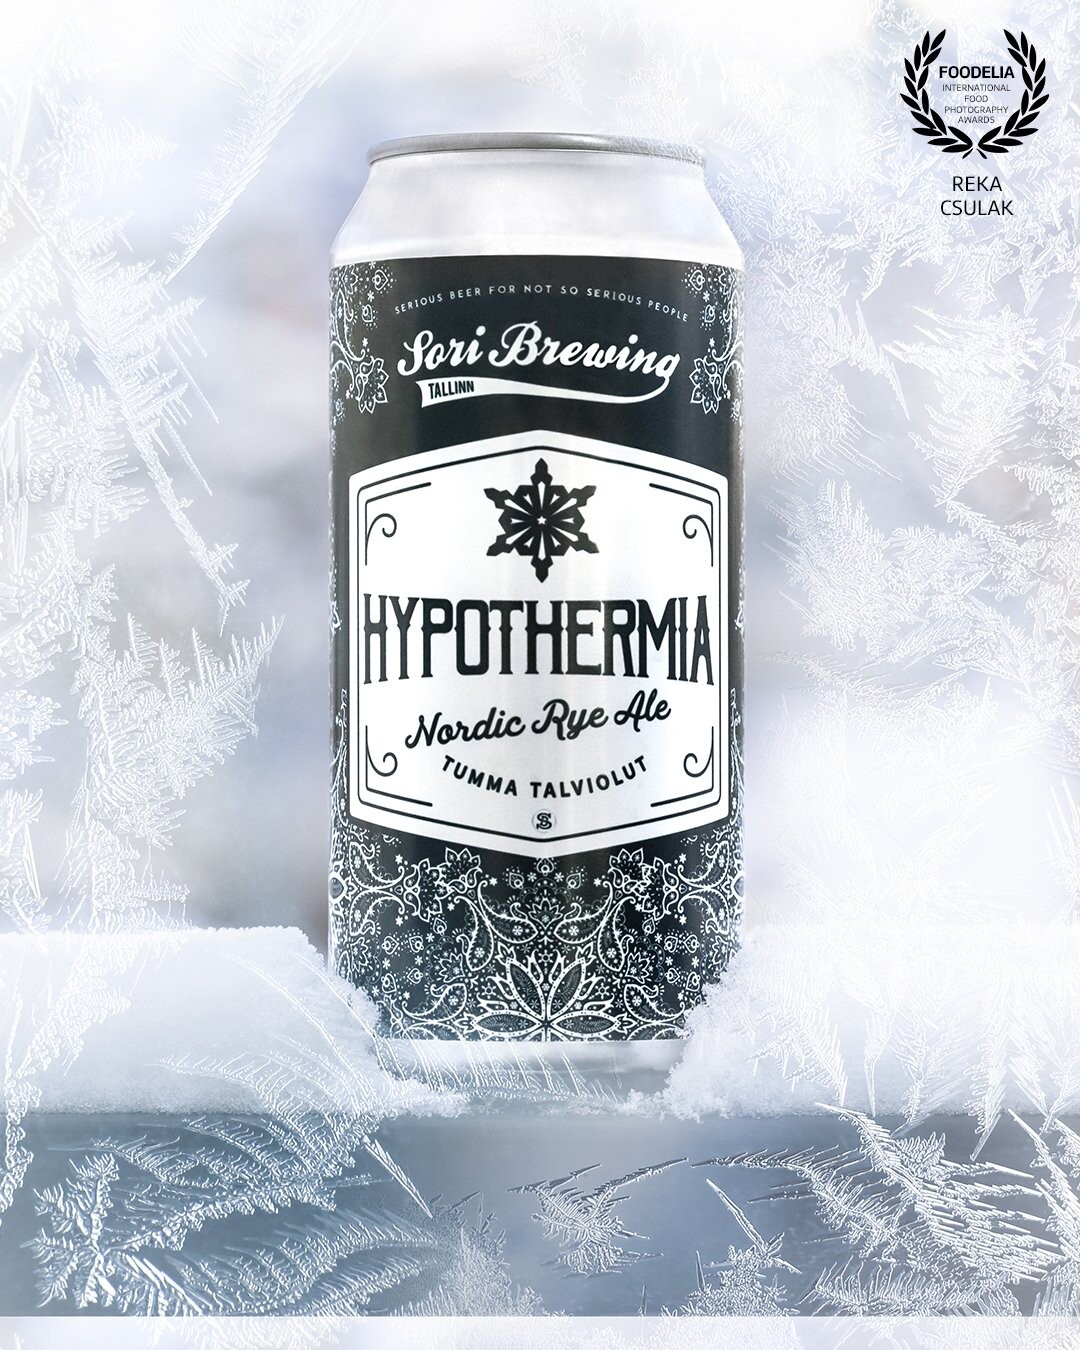 Who does’t love commercial images if the art director keeps the visual branding in mind when coming up with the creative concept? Reka designed the visuals for this Nordic rye ale in a way that the can appears in a frosty environment!